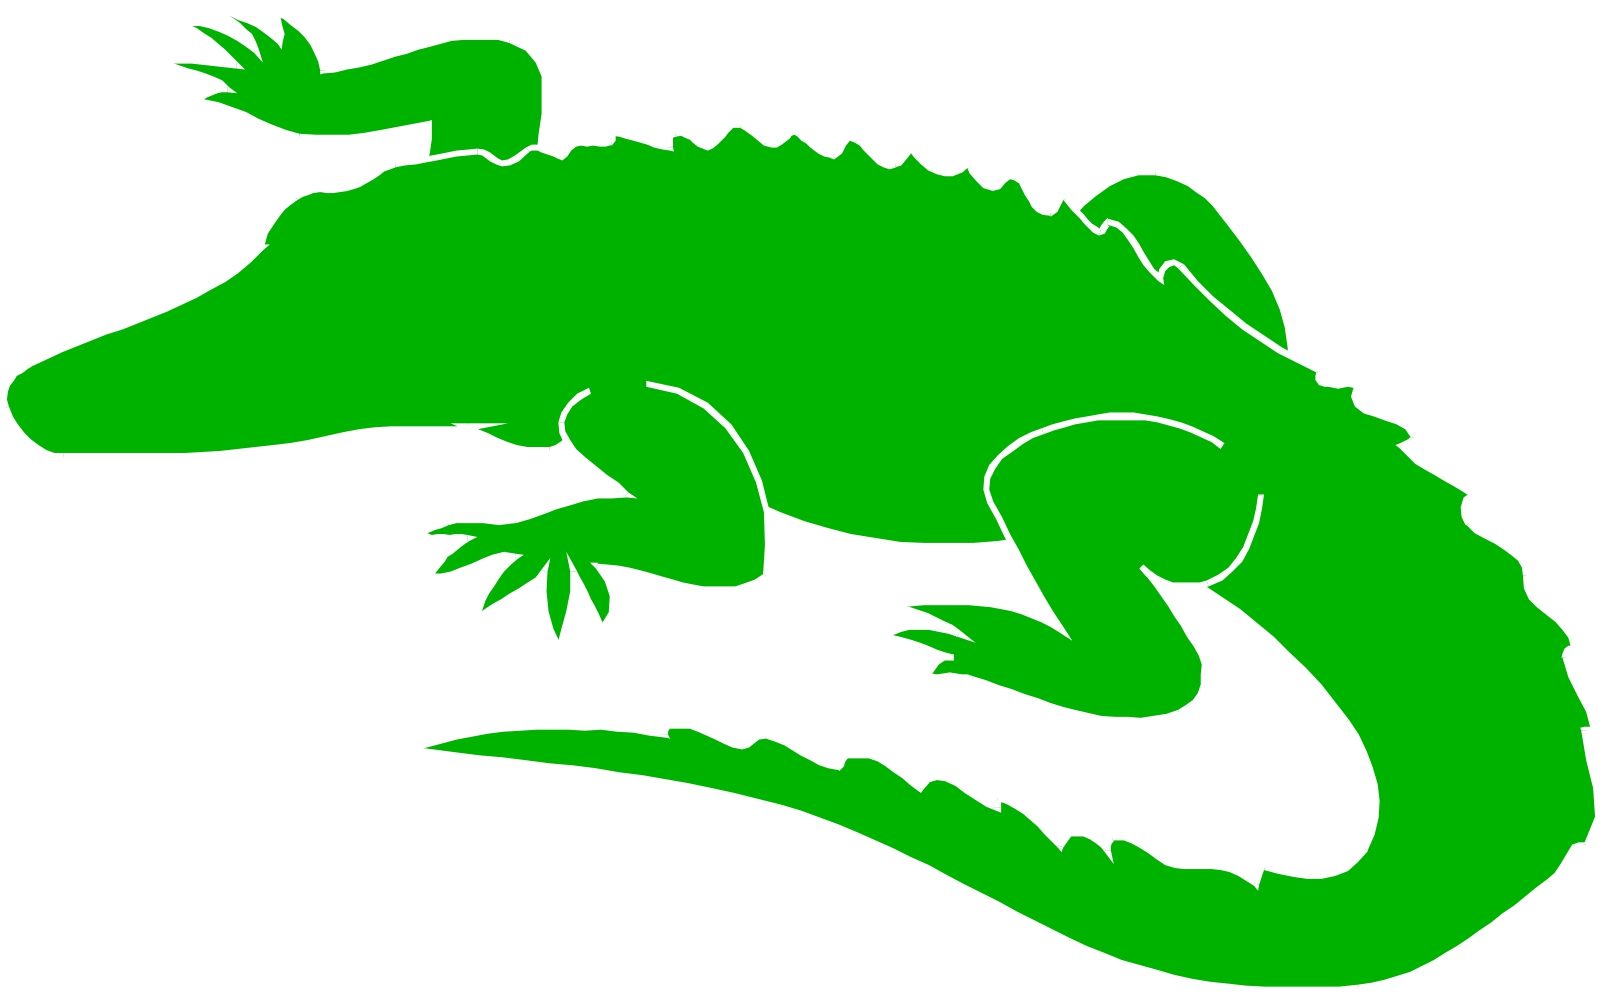 Alligator clip art free clipart cliparts for you